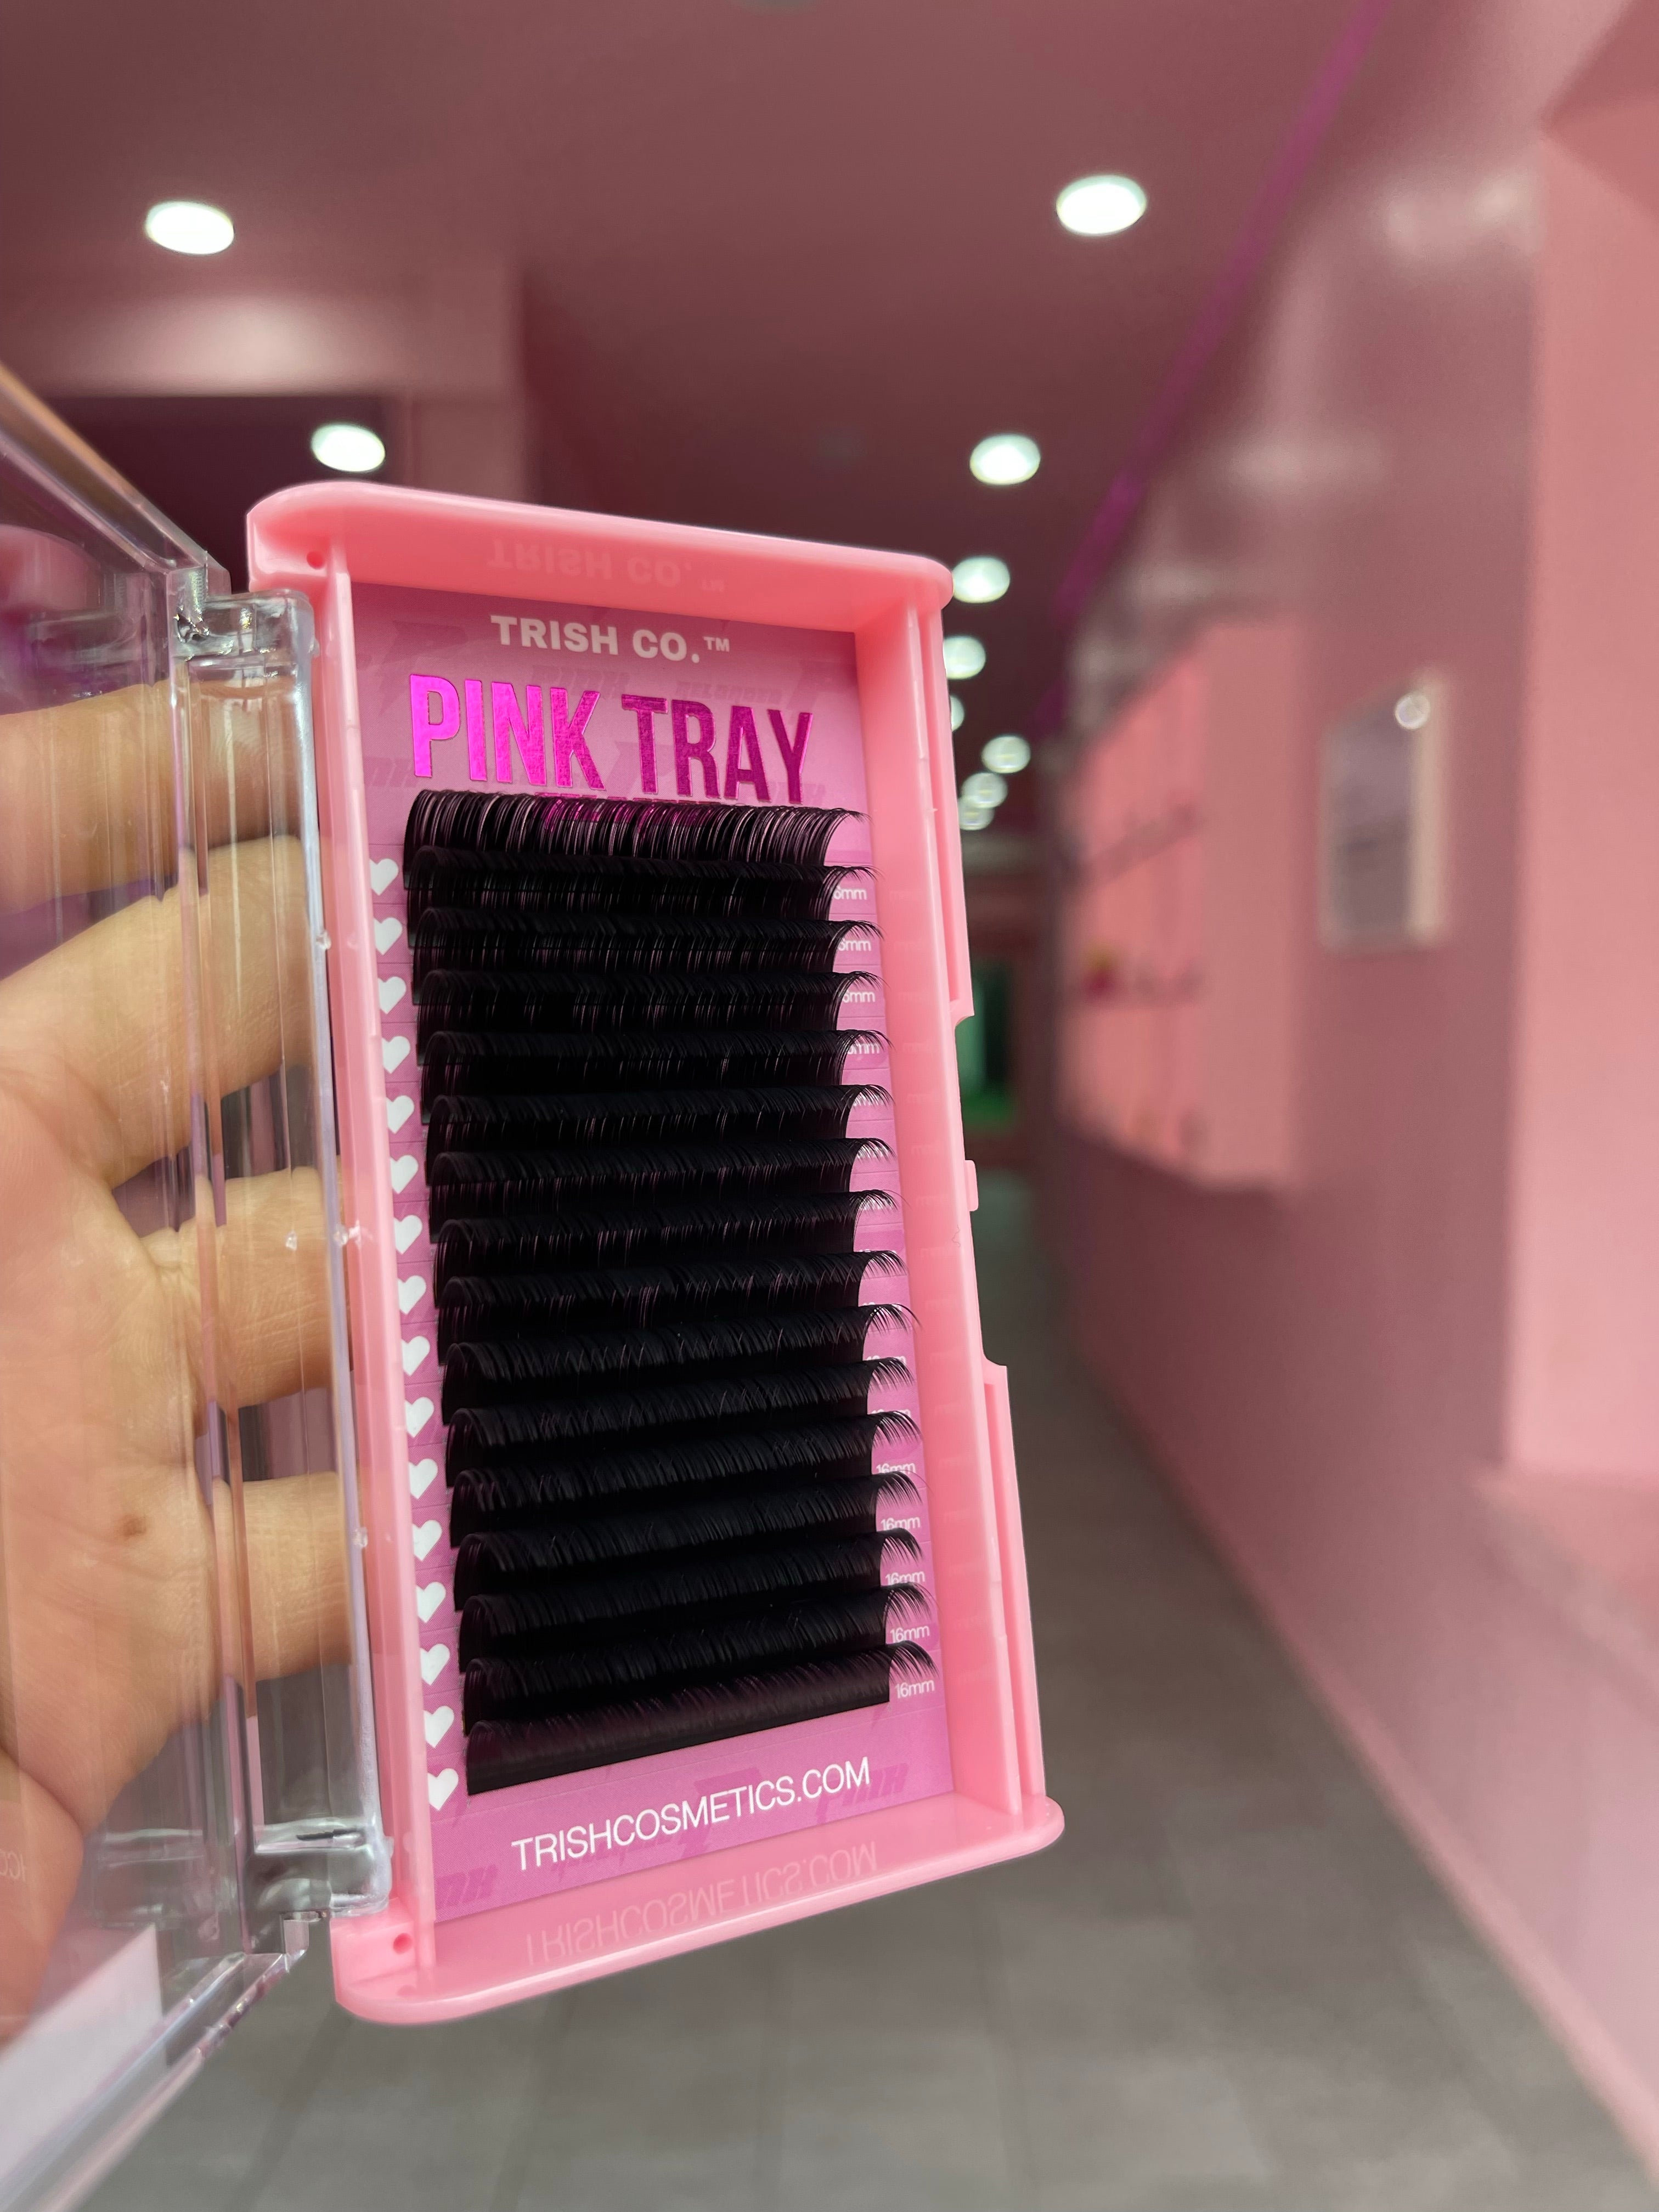 Pink Trays RELOADED ⚡️ CC curl .05